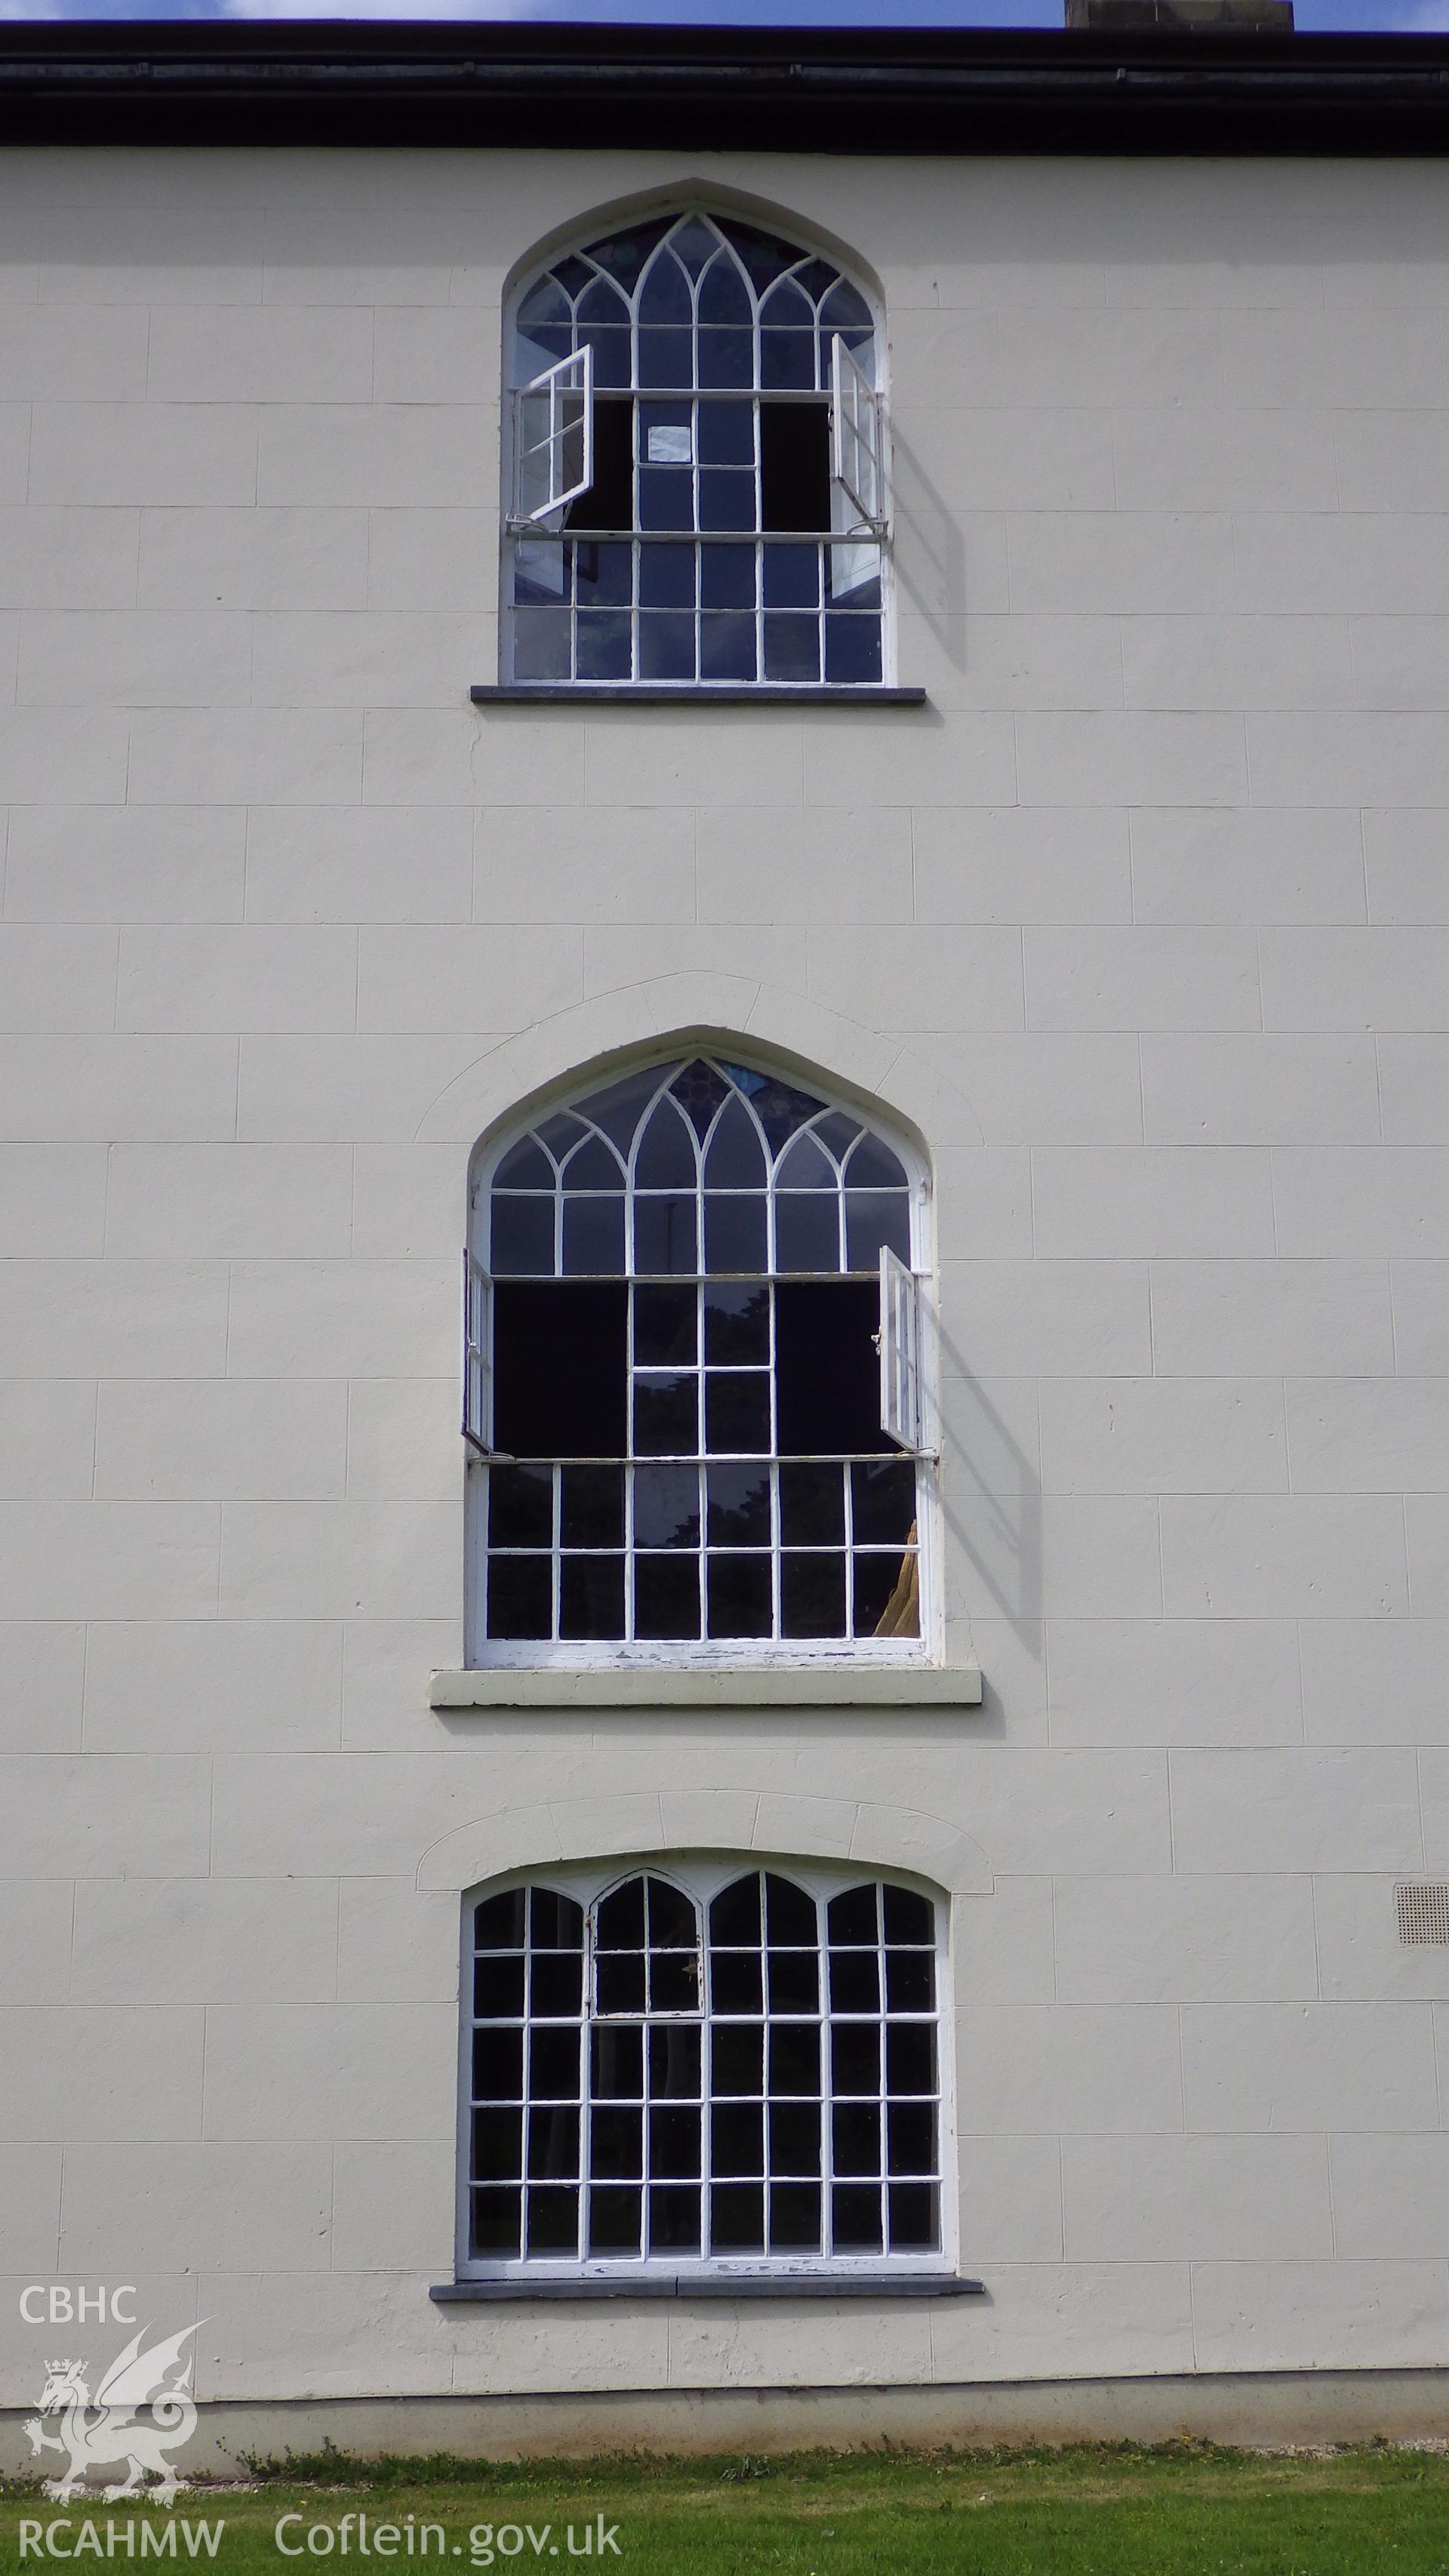 Detail of windows in southern elevation